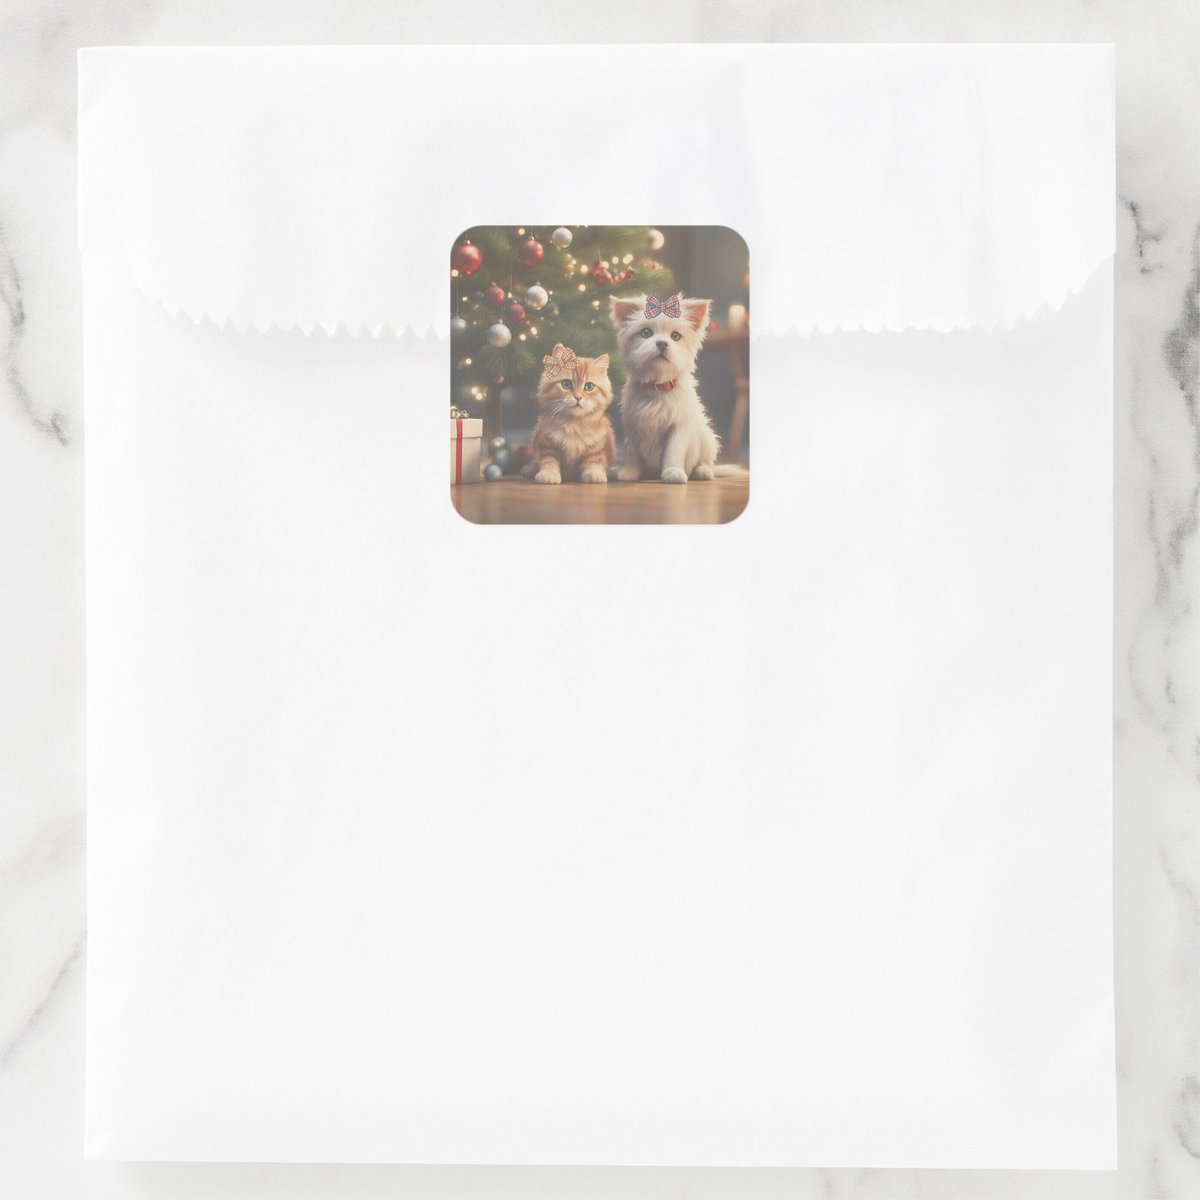 Cute Christmas Cat and Dog Lover Gifts  Square Sticker zazzle.co.uk/z/16dxwue8?rf=… via @zazzle
My latest cute cat and dog sticker gifts! Check them out! #catanddog #catlover #doglover #christmasanima #cutestickers #animalstickers #Christmasgifts #christmasstickers #christmas #cute